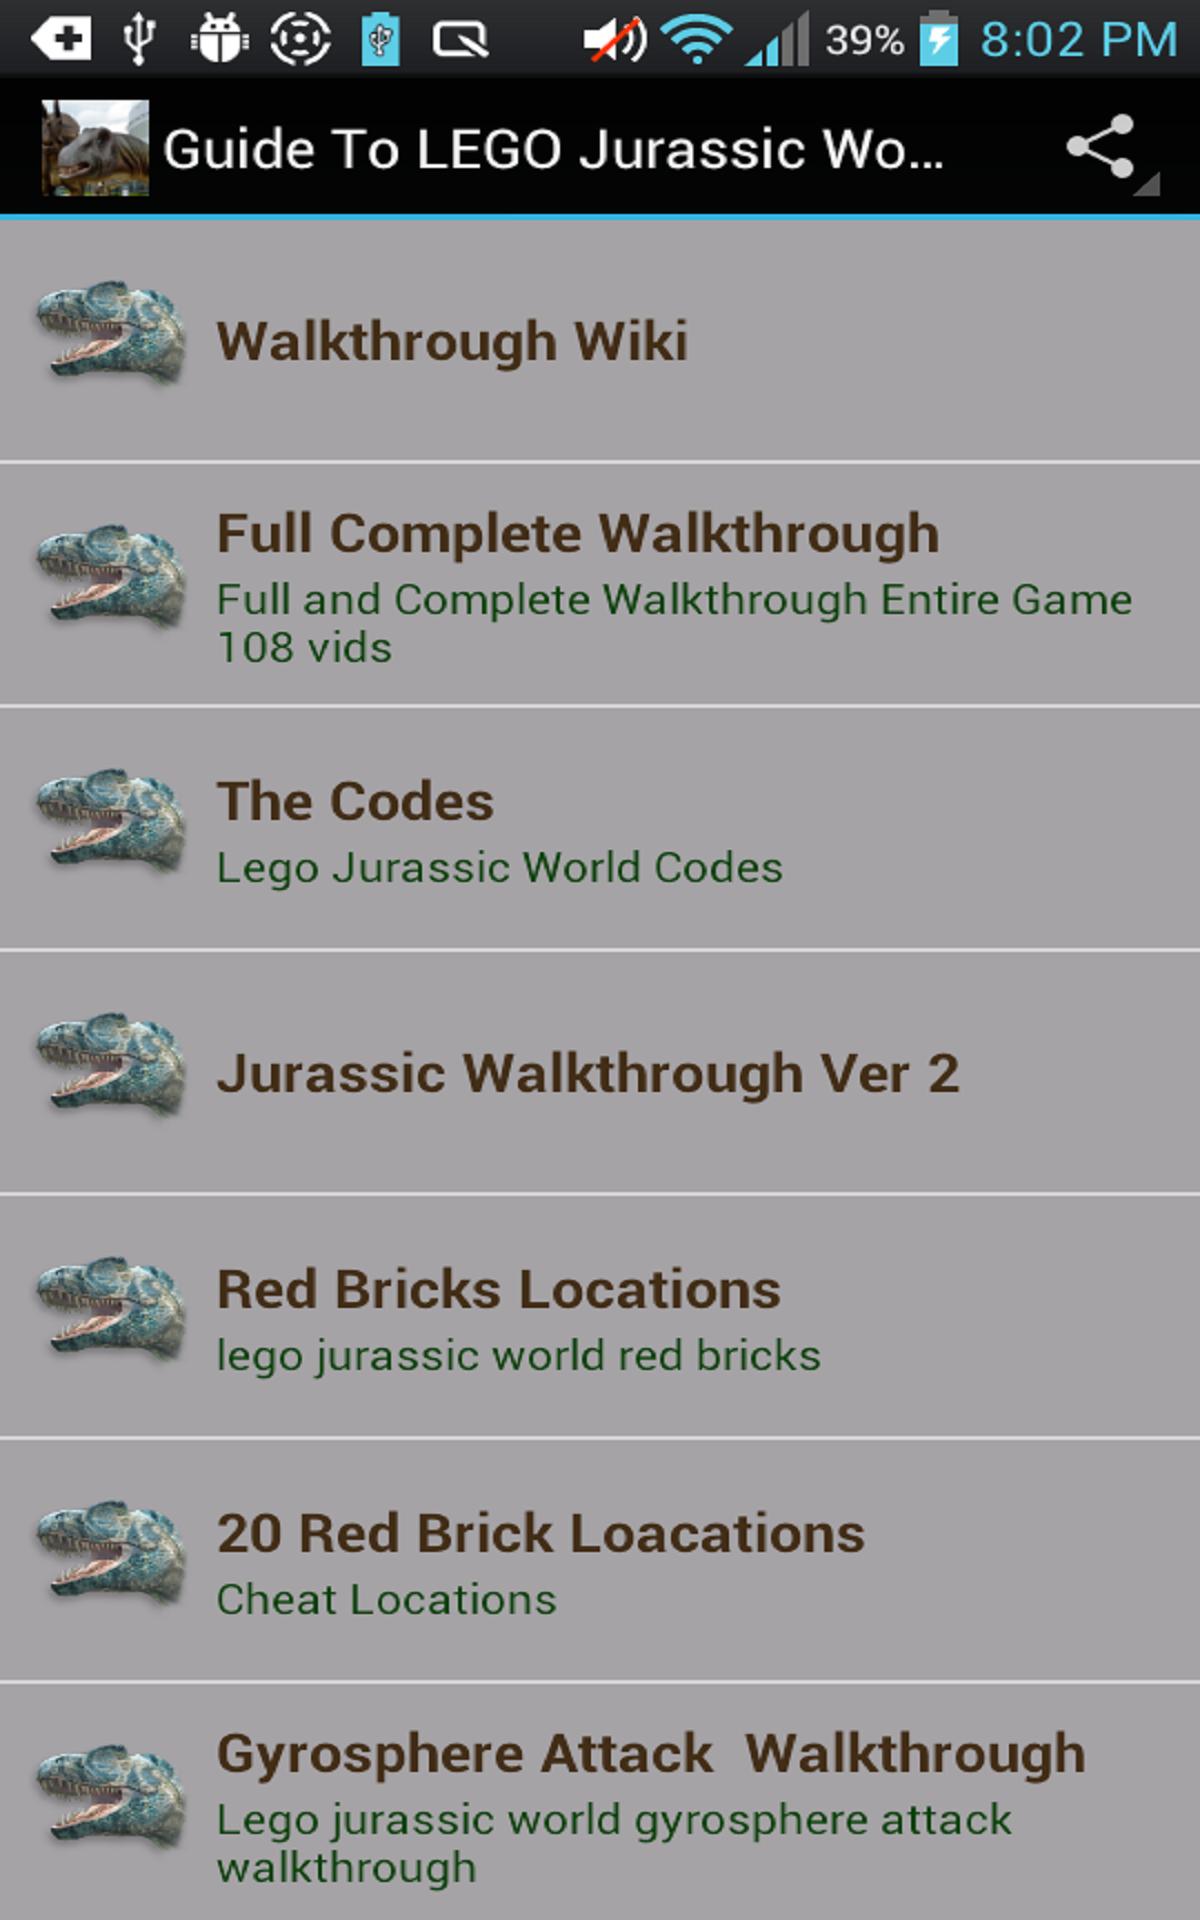 Guide To Lego Jurassic World For Android Apk Download - jurassic world codes roblox